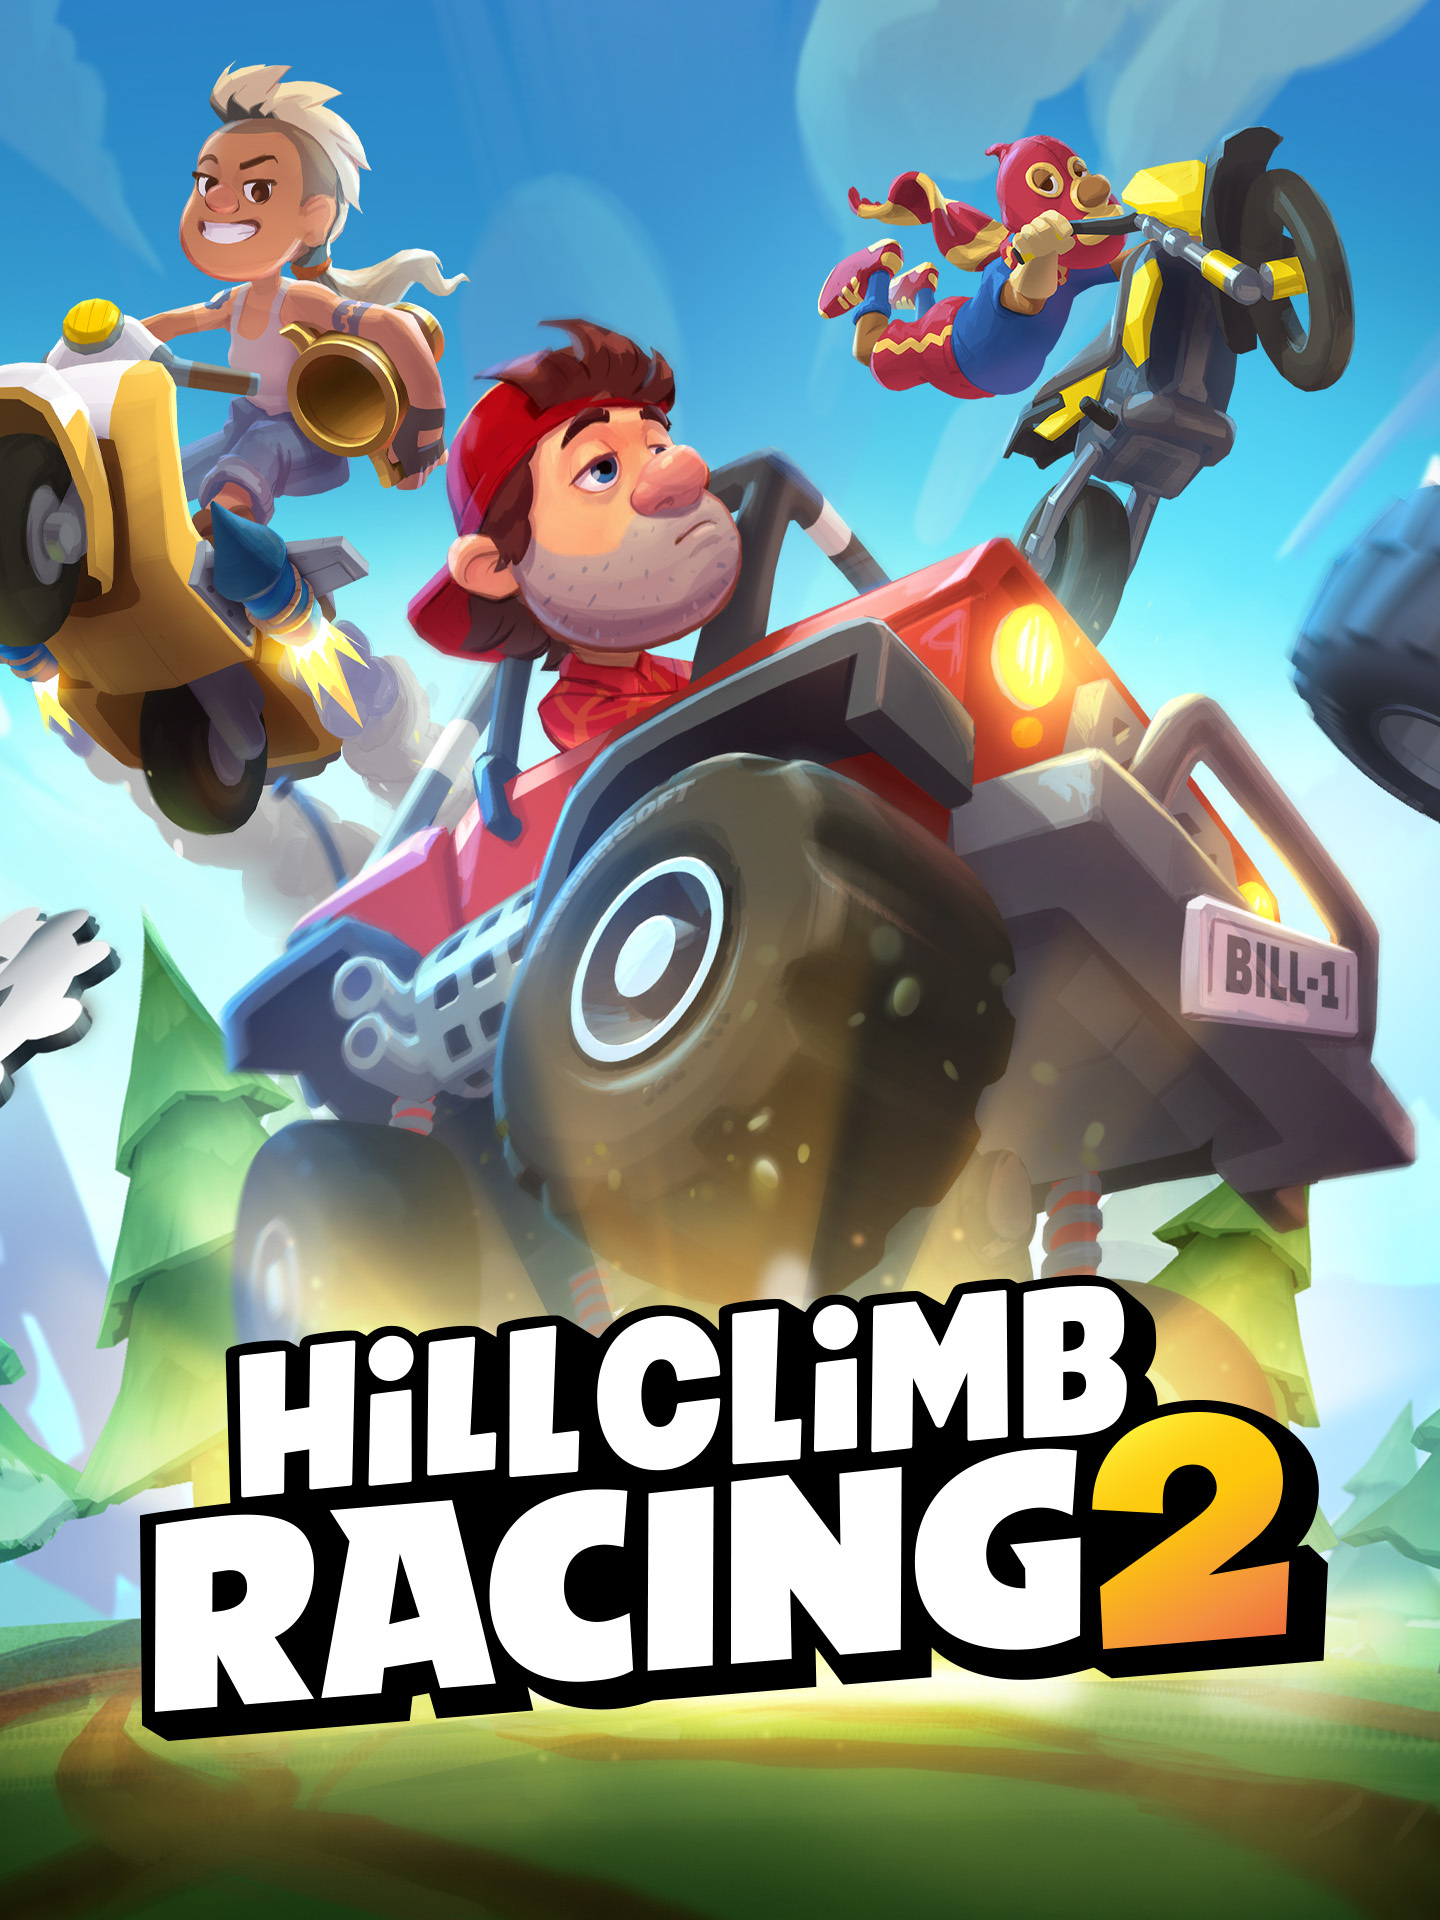 Hill Climb Racing 2 is coming to iOS and Android soon